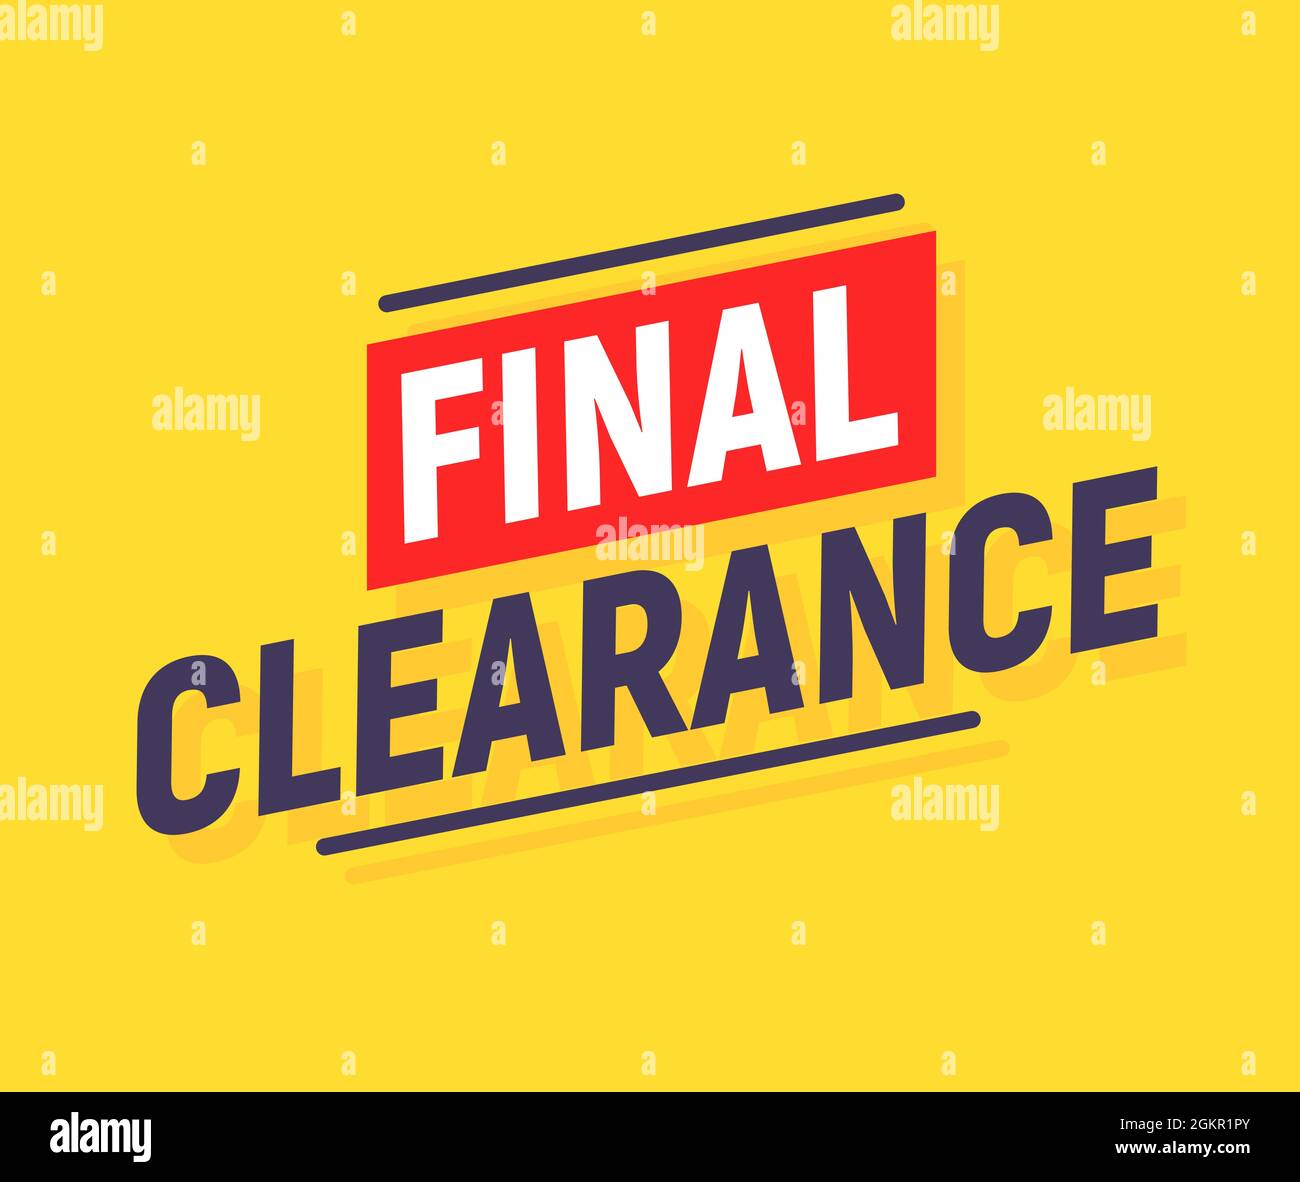 https://c8.alamy.com/comp/2GKR1PY/final-clearance-promo-banner-background-blowout-sale-discount-offer-huge-total-vector-sale-poster-2GKR1PY.jpg